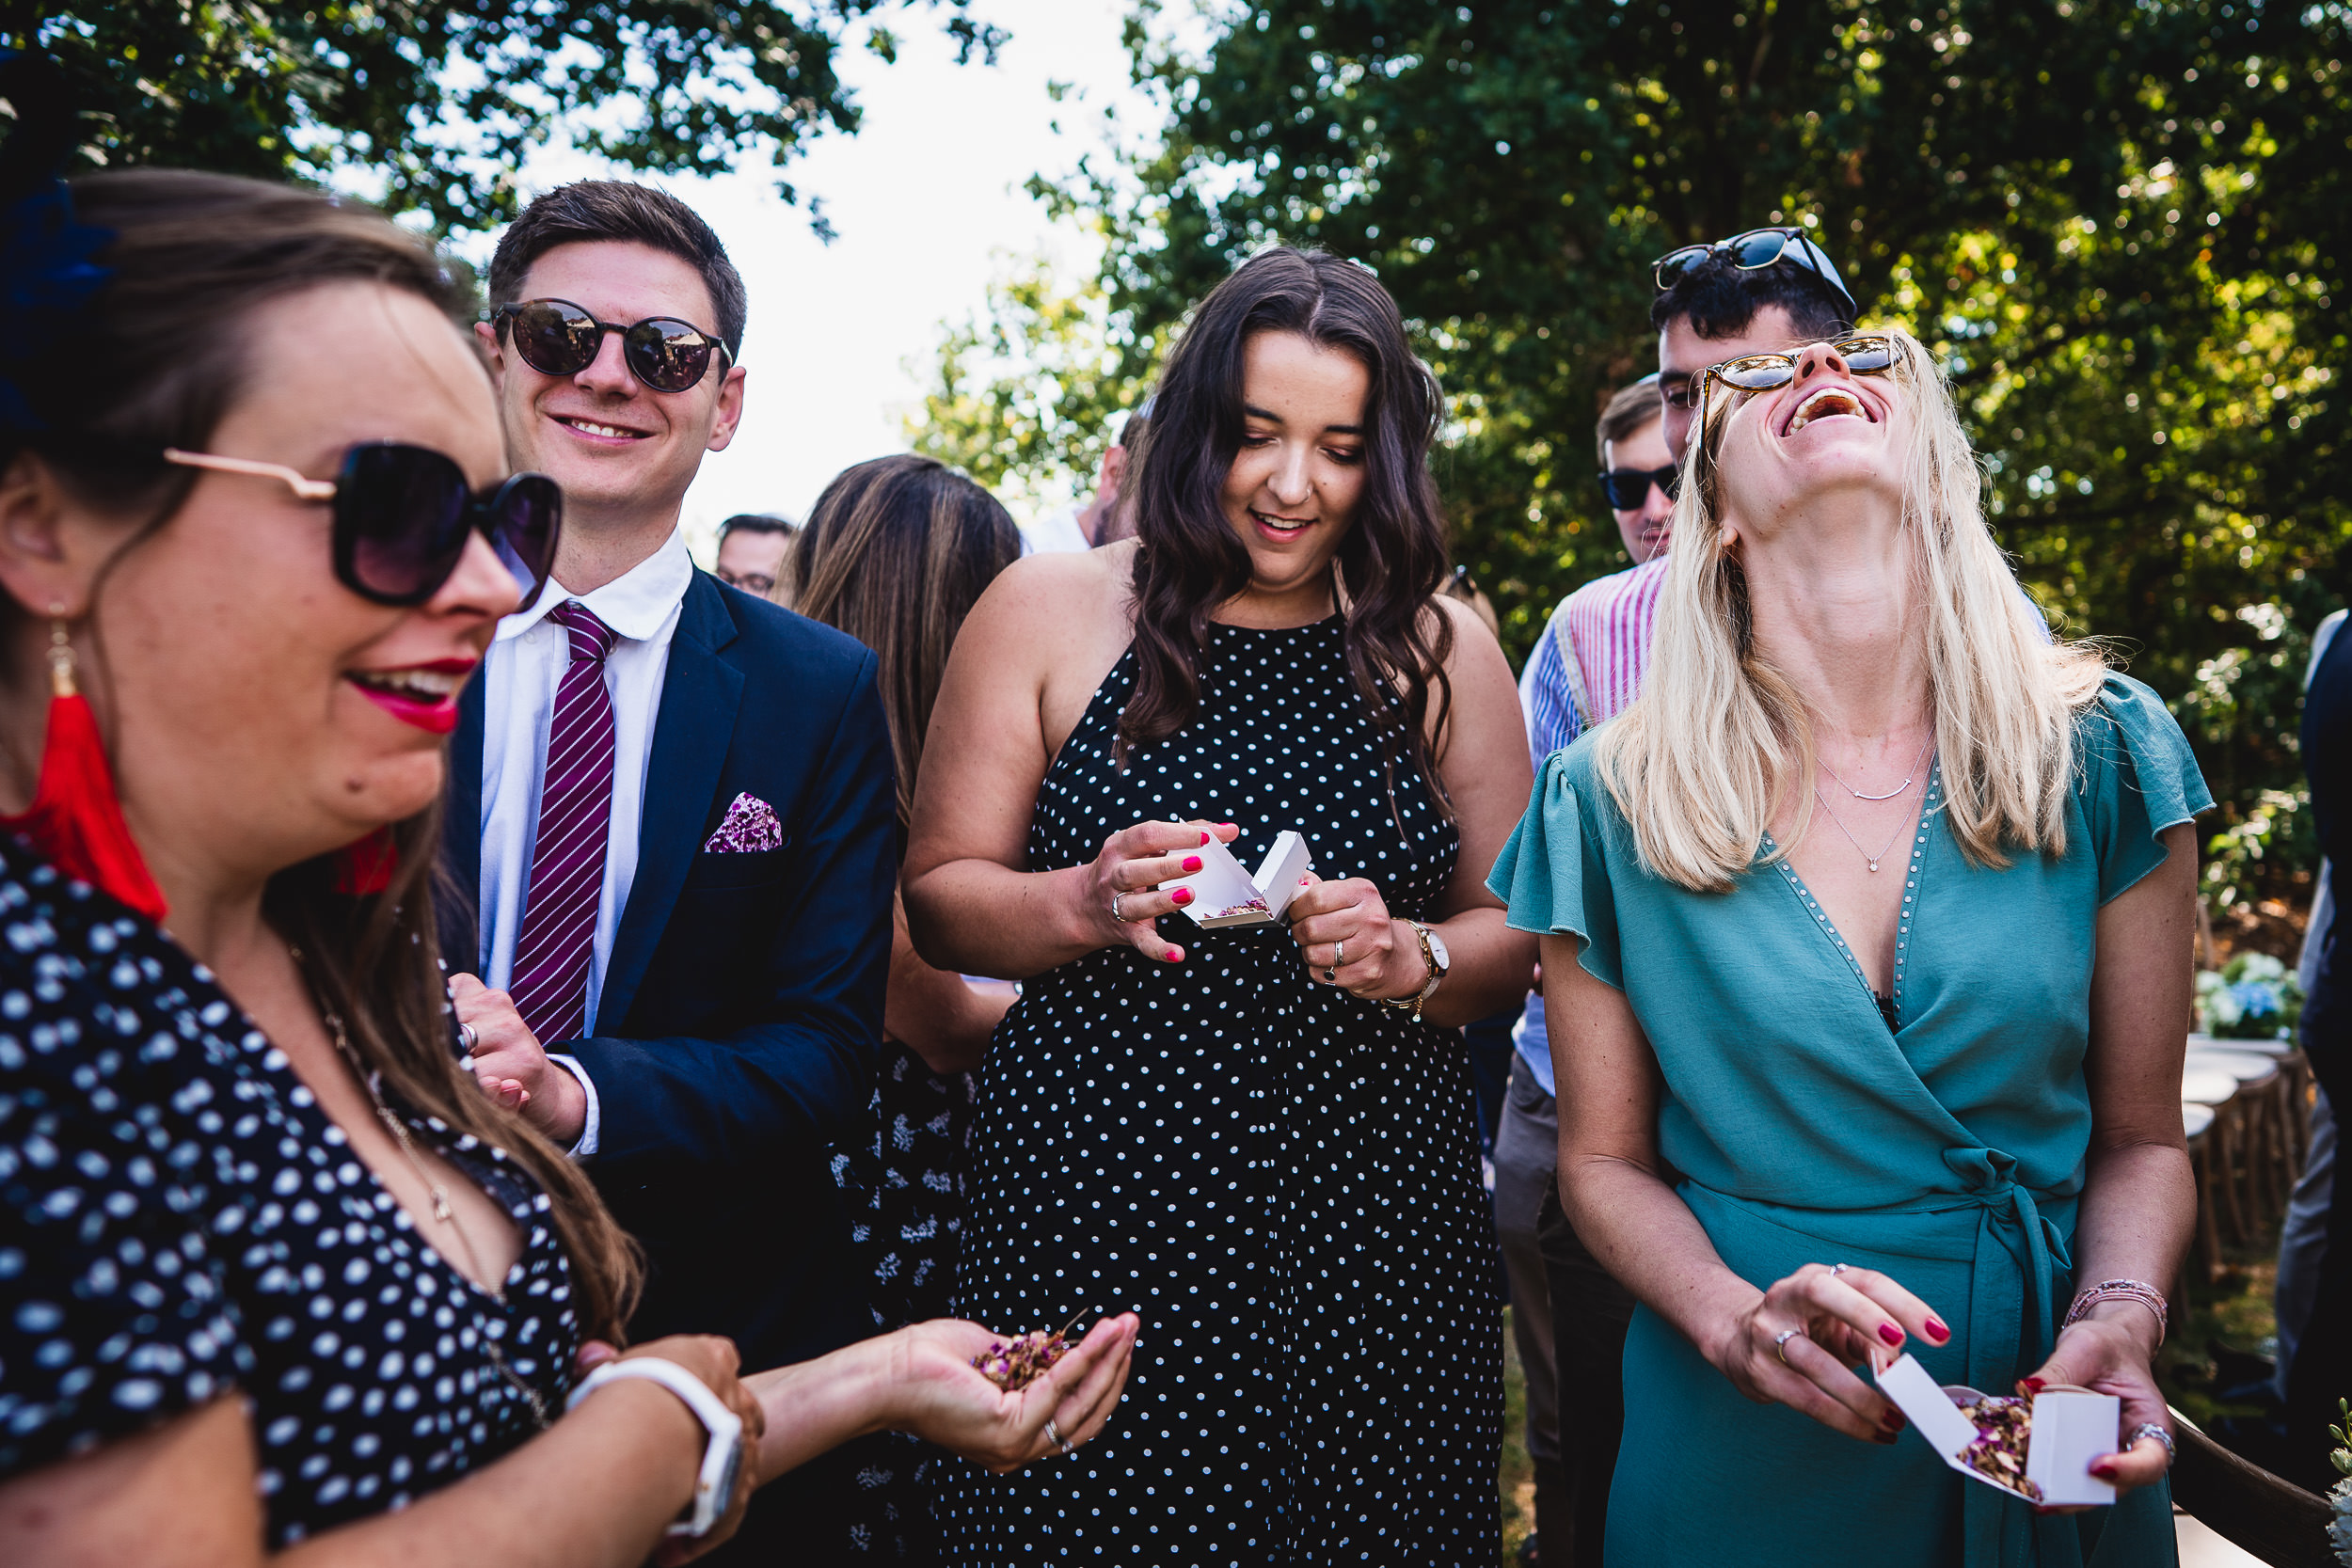 A group of people laughing at a wedding party.